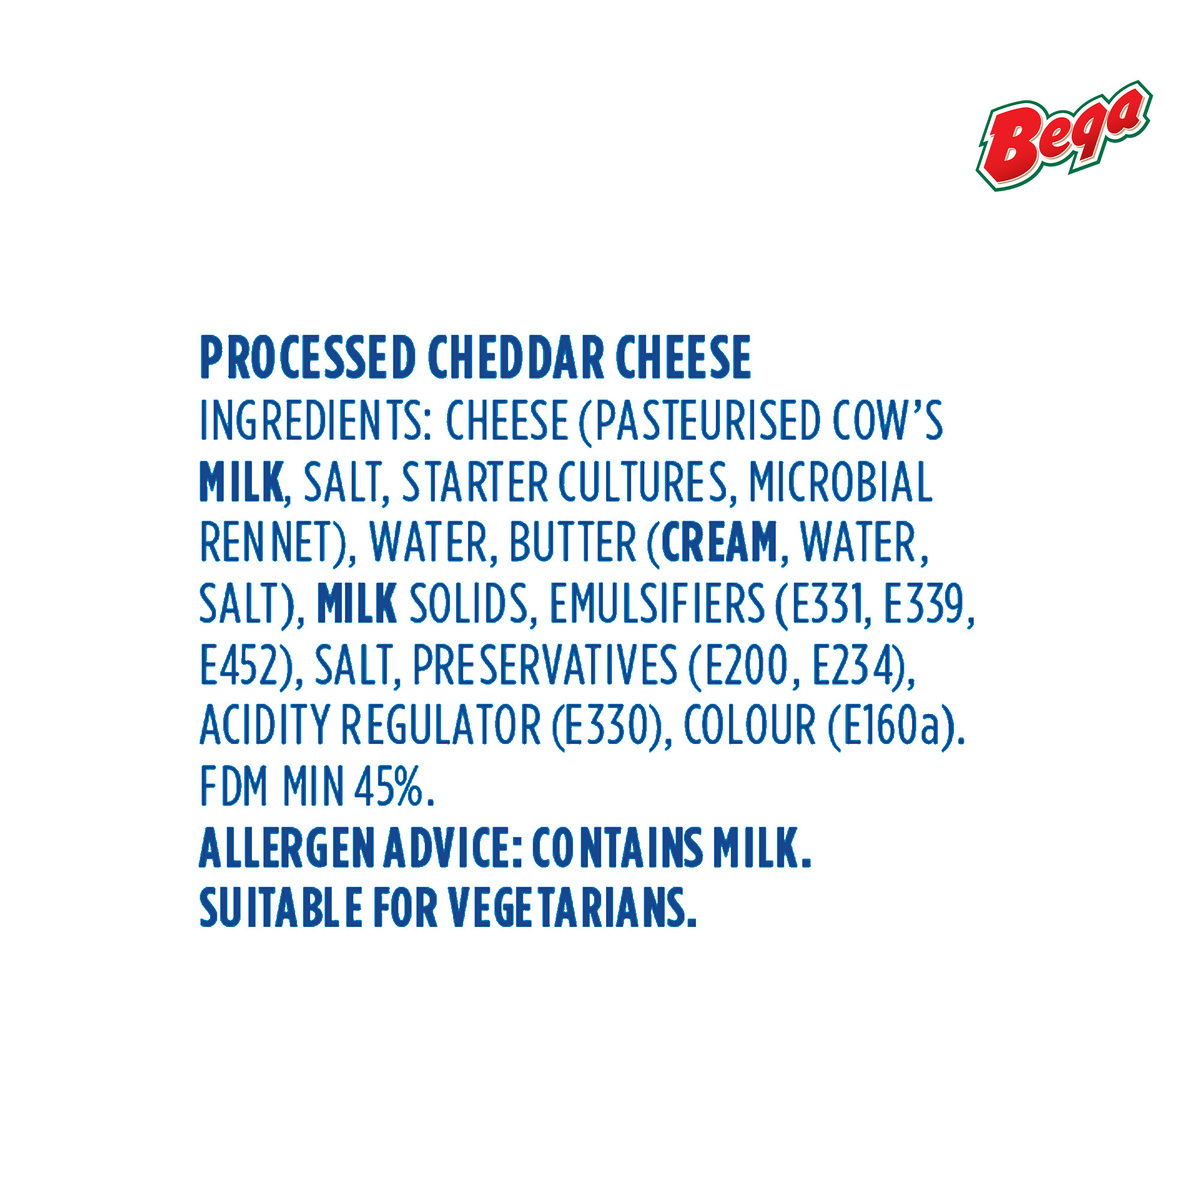 Bega Processed Cheddar Cheese Block Value Pack 500 g